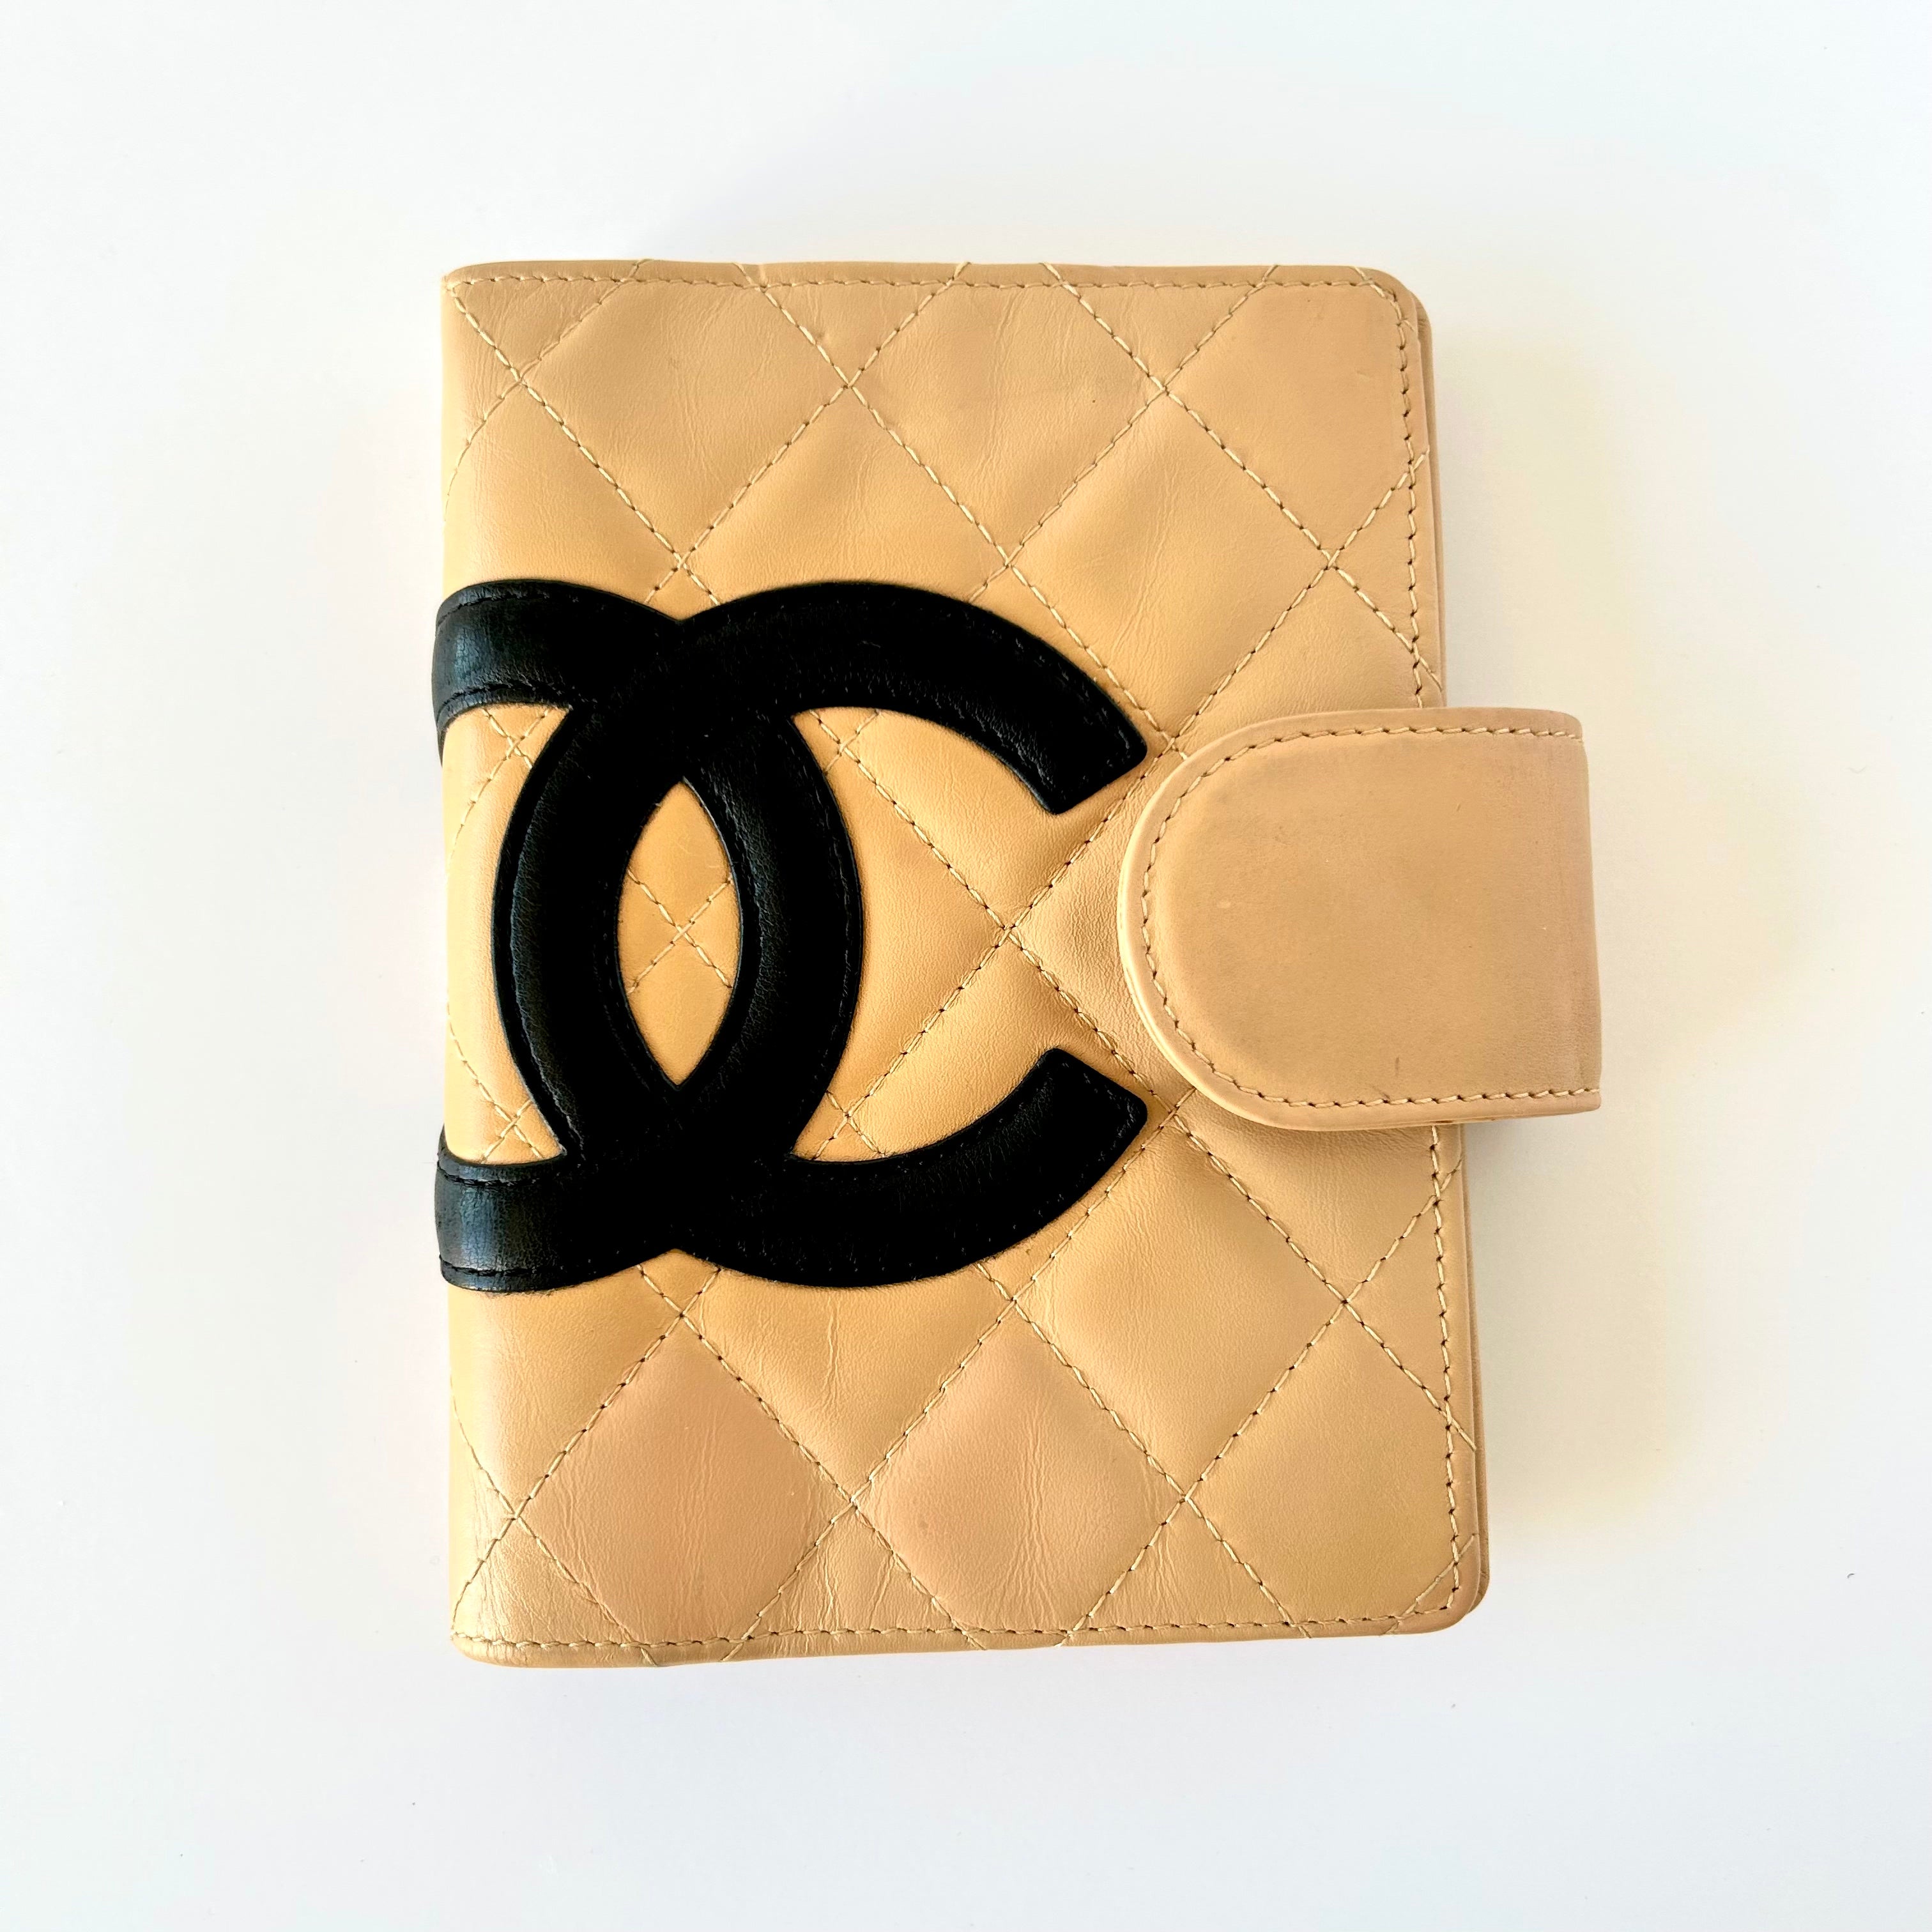 Authentic Chanel Agenda Notebook cover round zipper cambon line COC mark  Leather